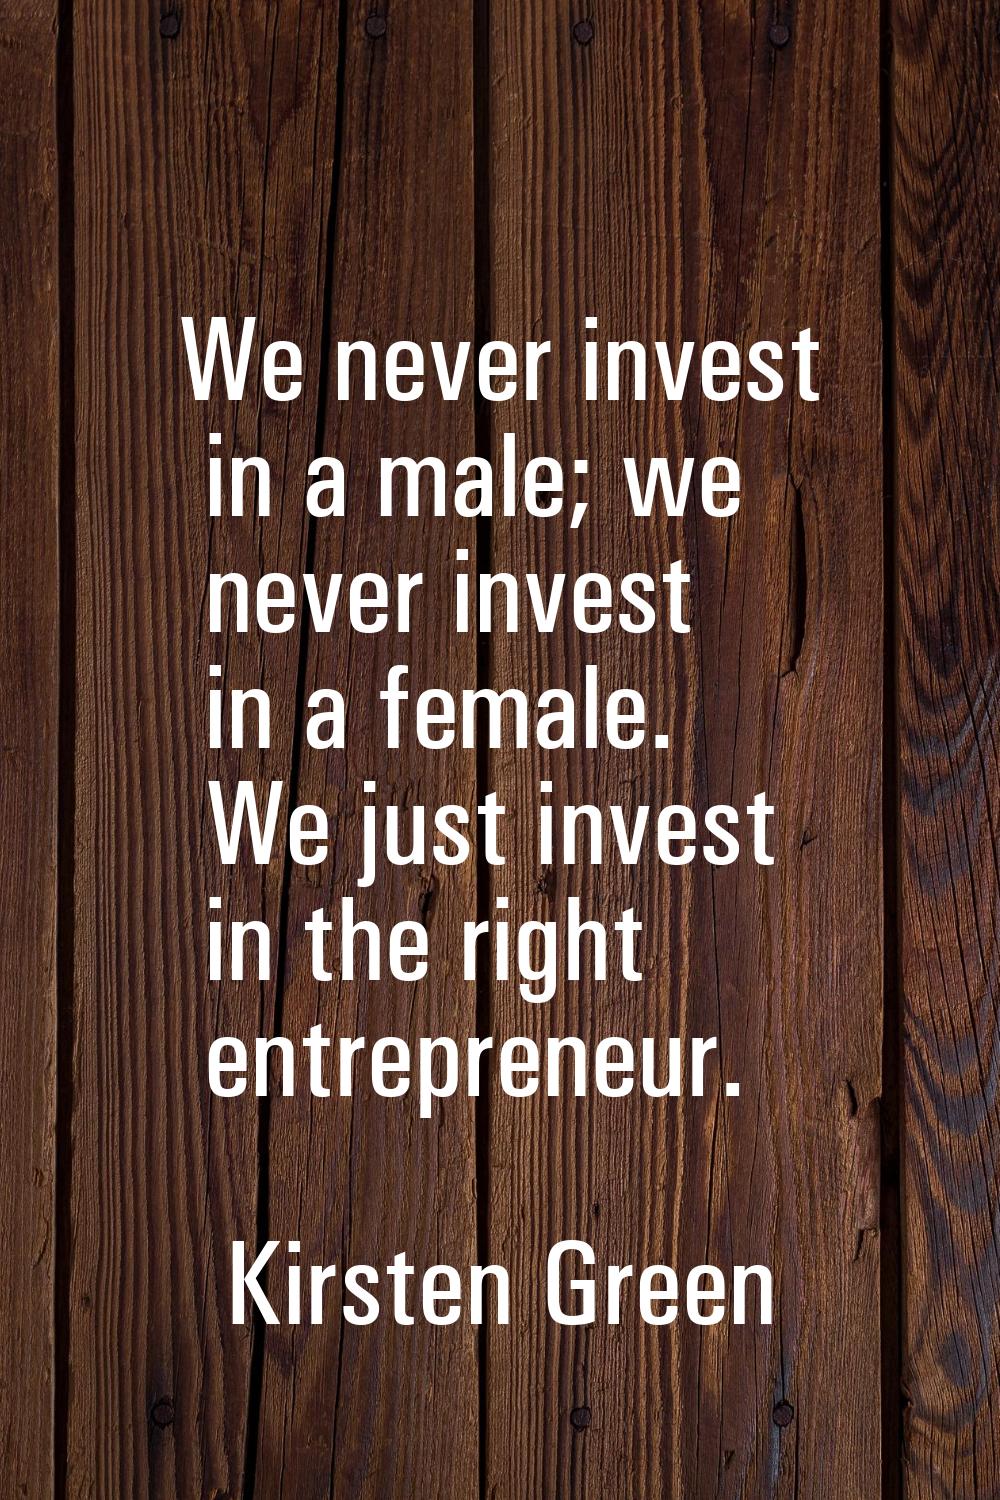 We never invest in a male; we never invest in a female. We just invest in the right entrepreneur.